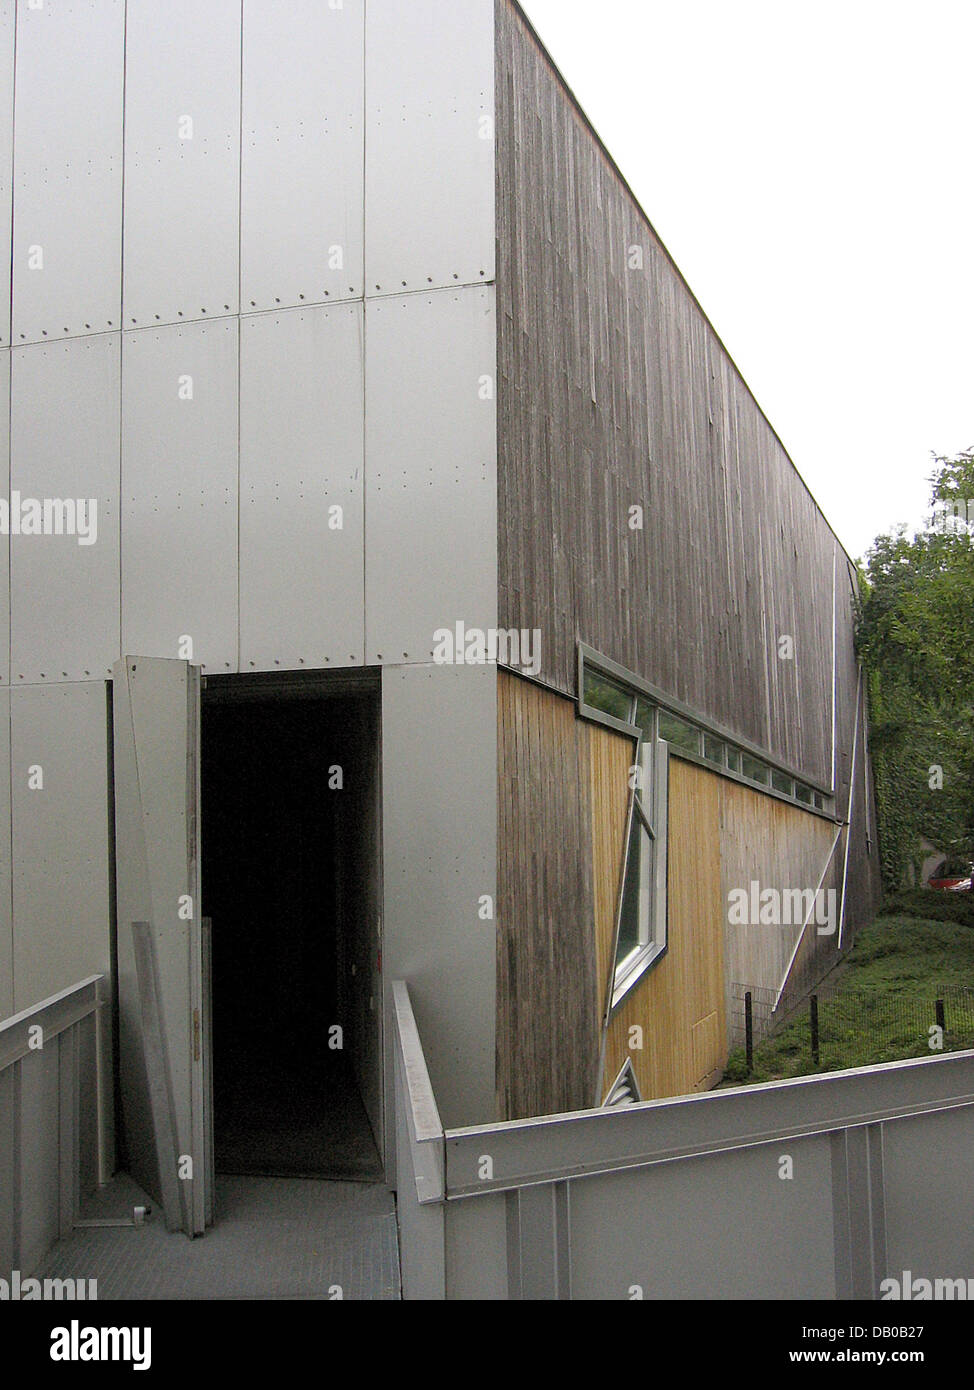 The photo shows the entrance of Felix Nussbaum Museum in Osnabrueck, Germany, 19 July 2007. The museum holds the world's largest collection of artworks by Felix Nussbaum, who was born in Osnabrueck in 1904 and murdered in Auschwitz in 1944. It was designed by US American architect Daniel Libeskind, who composed a building, which corresponds well to life and work of the artist. The  Stock Photo